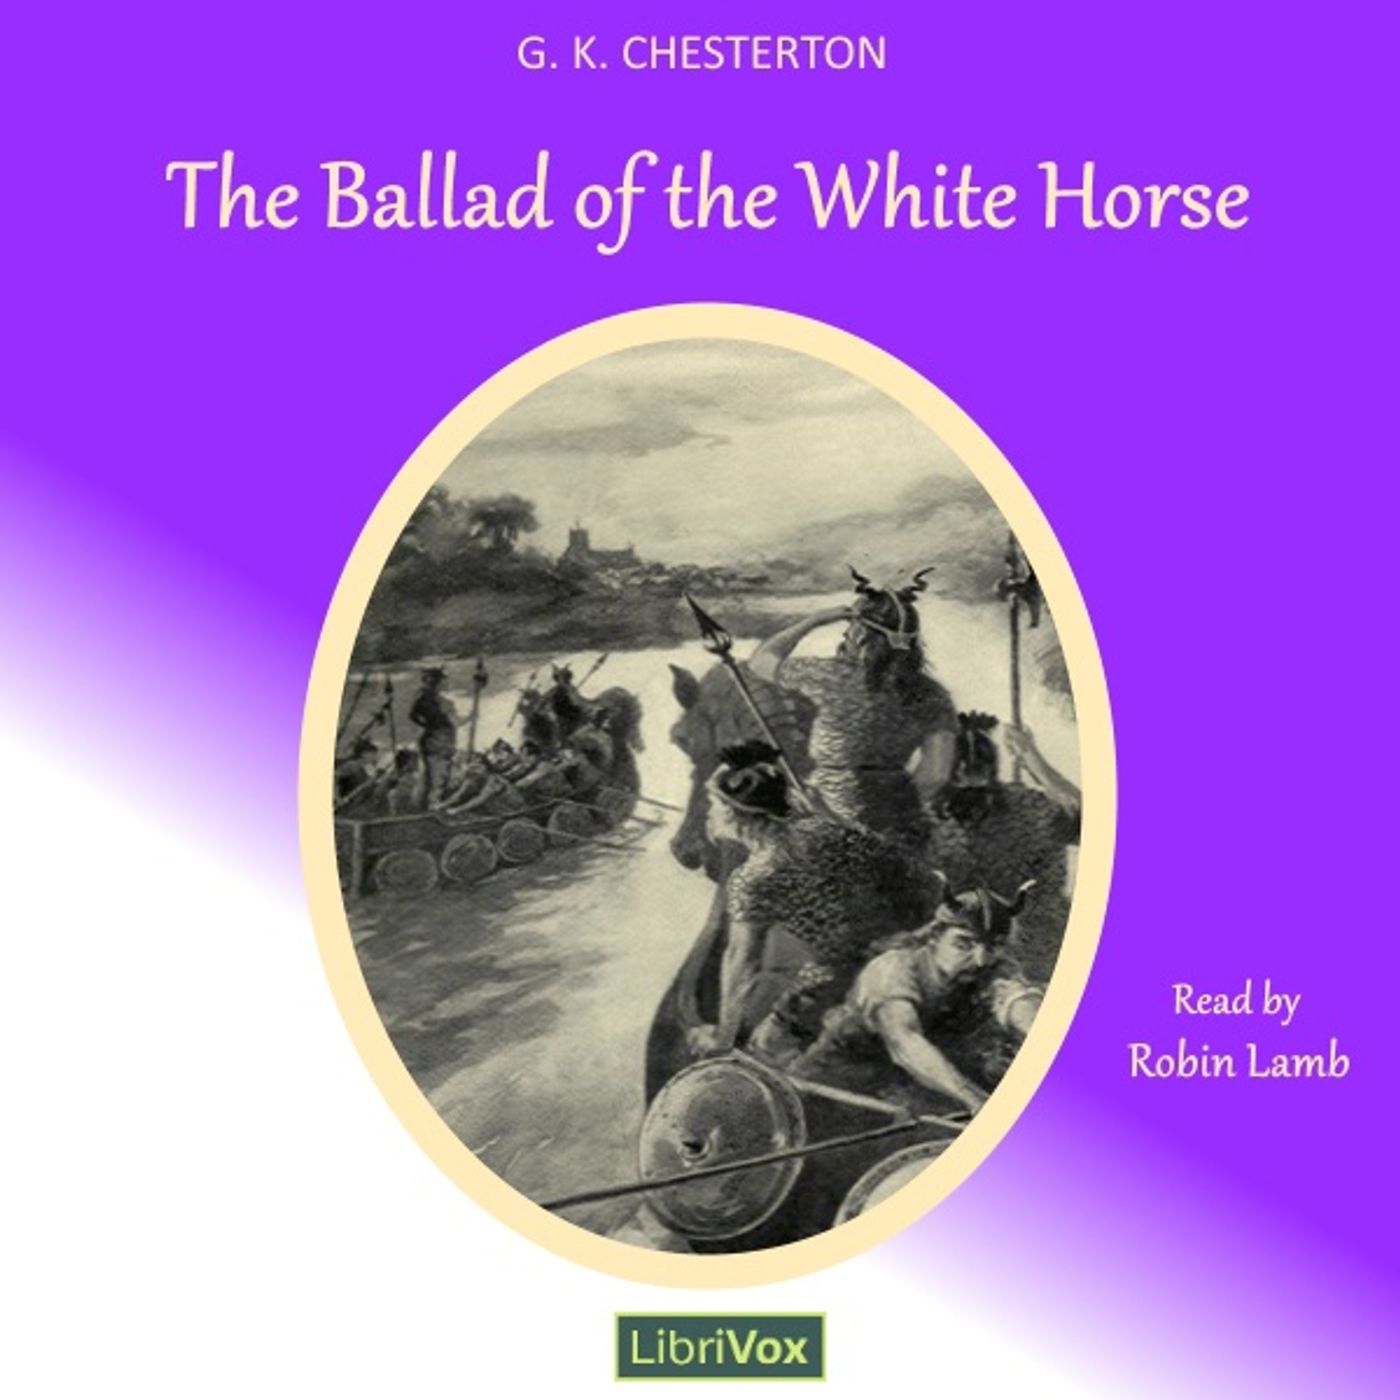 Ballad of the White Horse (Version 3), The by G. K. Chesterton (1874 – 1936)